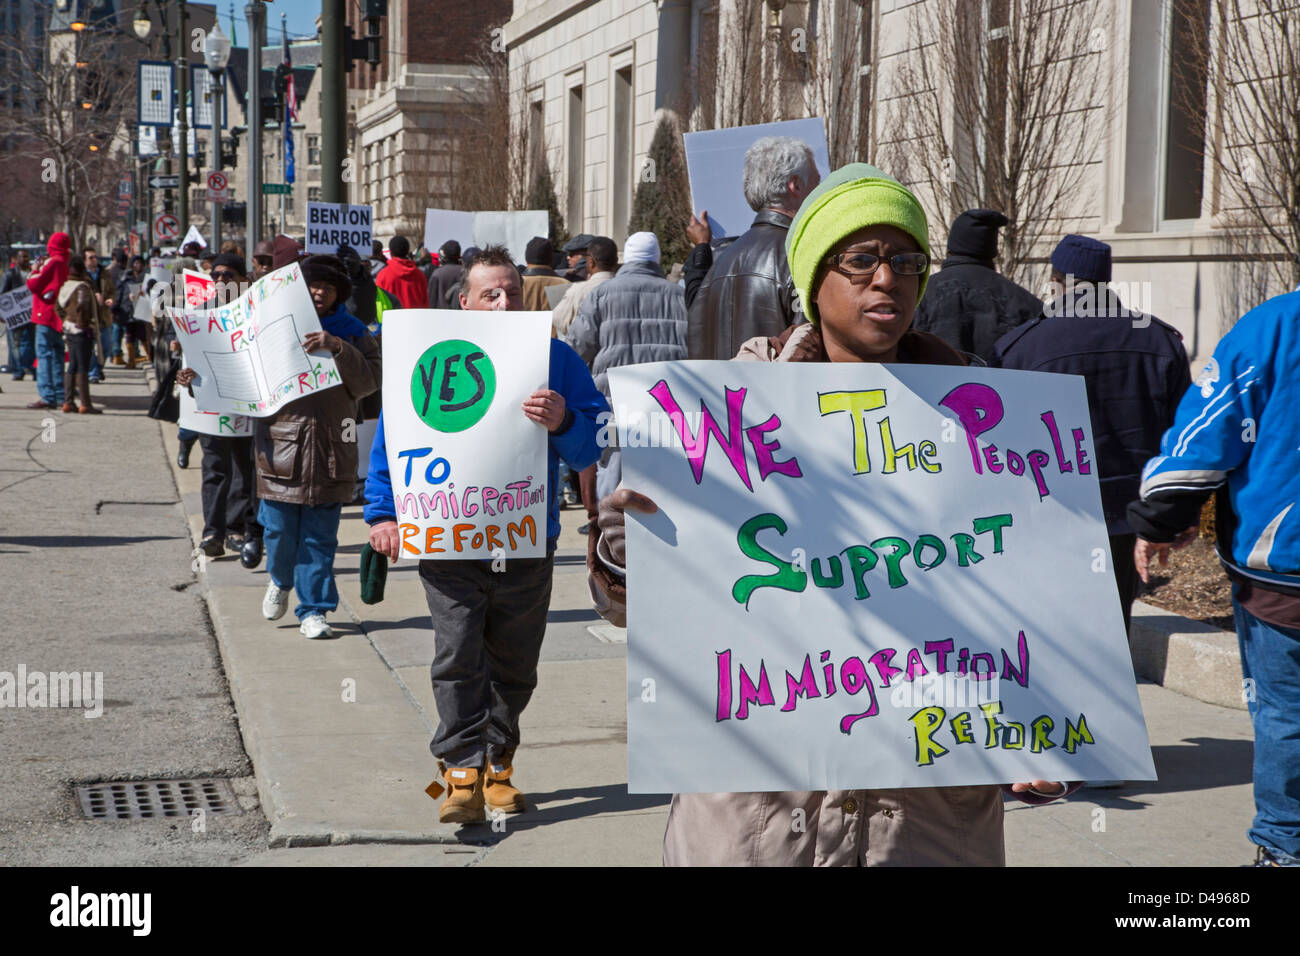 Detroit, Michigan - Detroit residents rally for immigration reform. Stock Photo